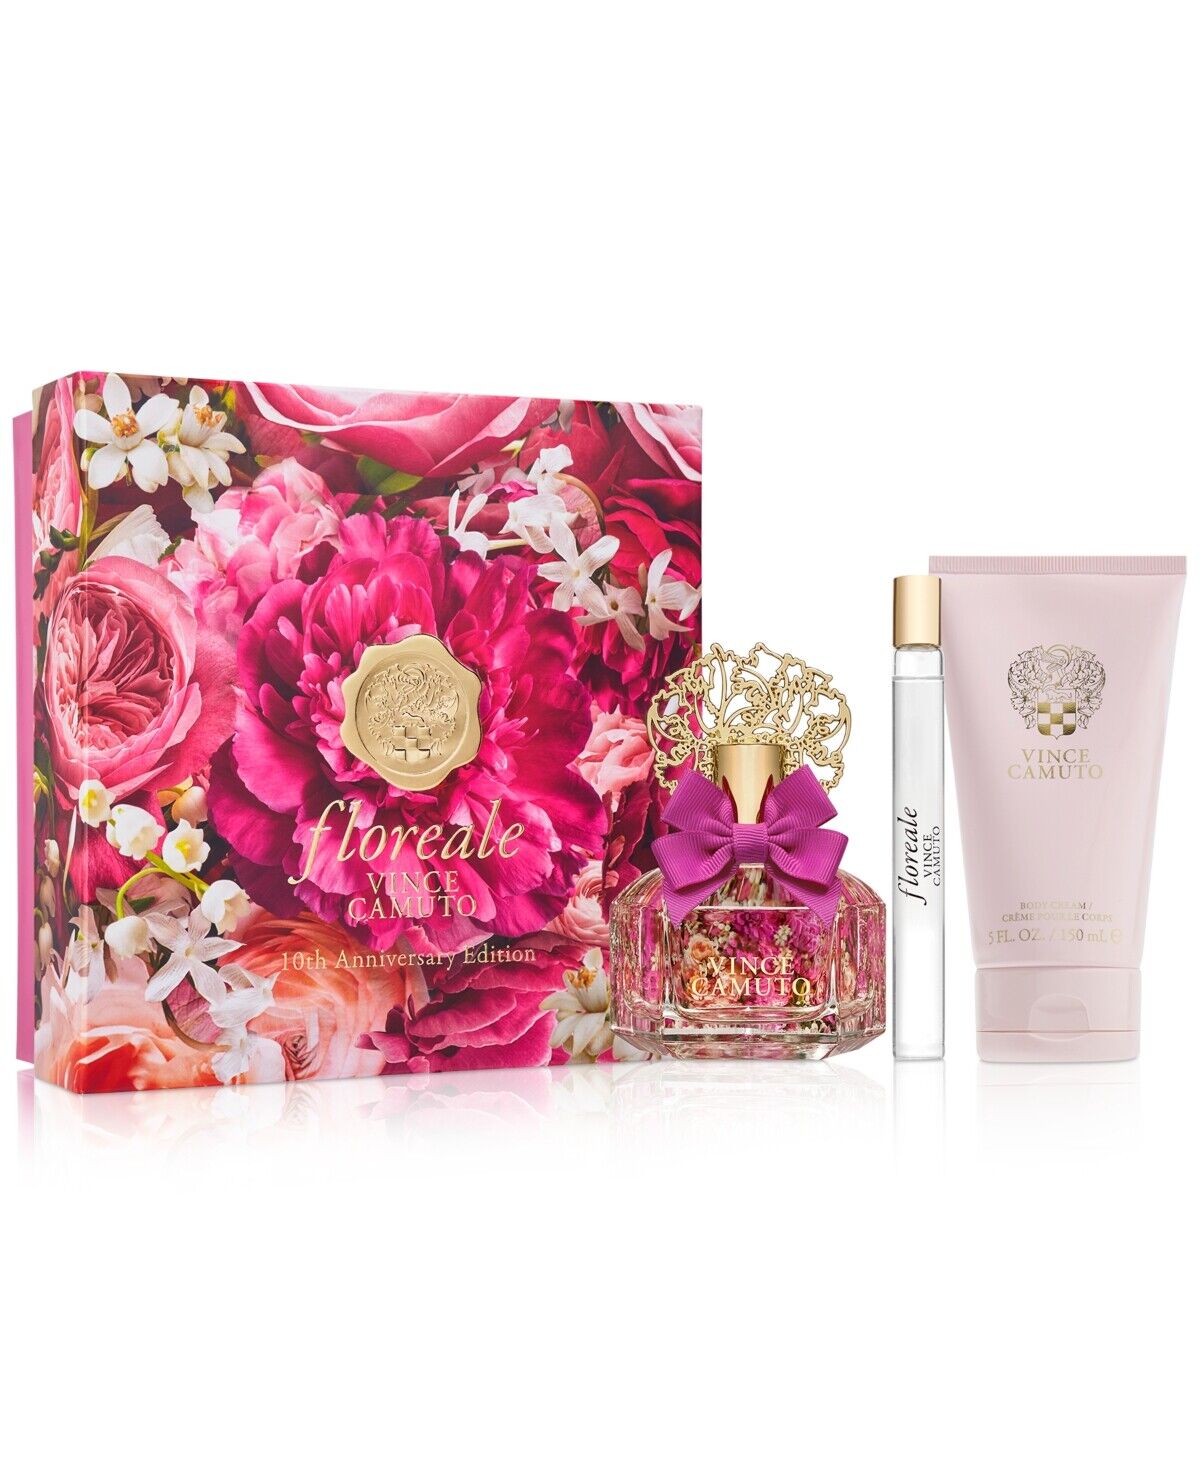 Vince Camuto Floreale Gift Set 3-Piece – Hair Care & Beauty